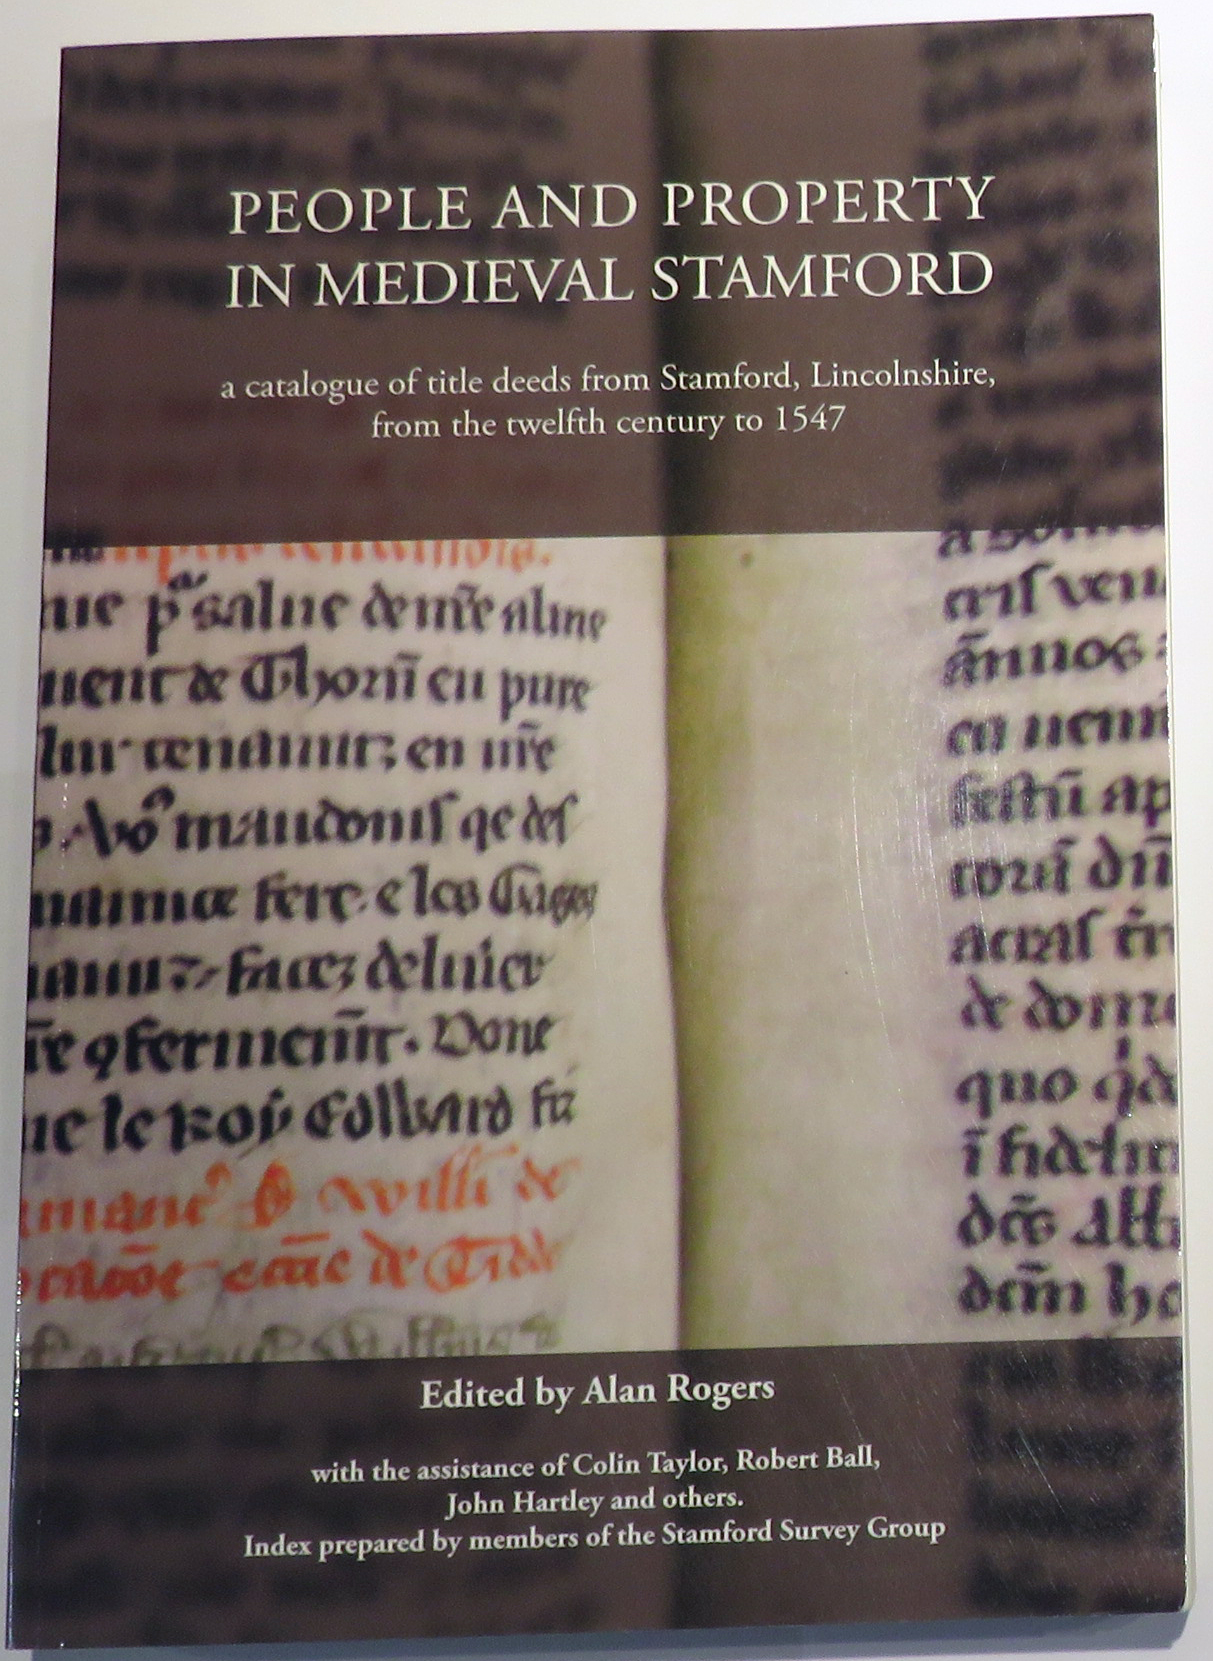 People And Property In Medieval Stamford a catalogue of title deeds from Stamford, Lincolnshire, from the twelfth century to 1547